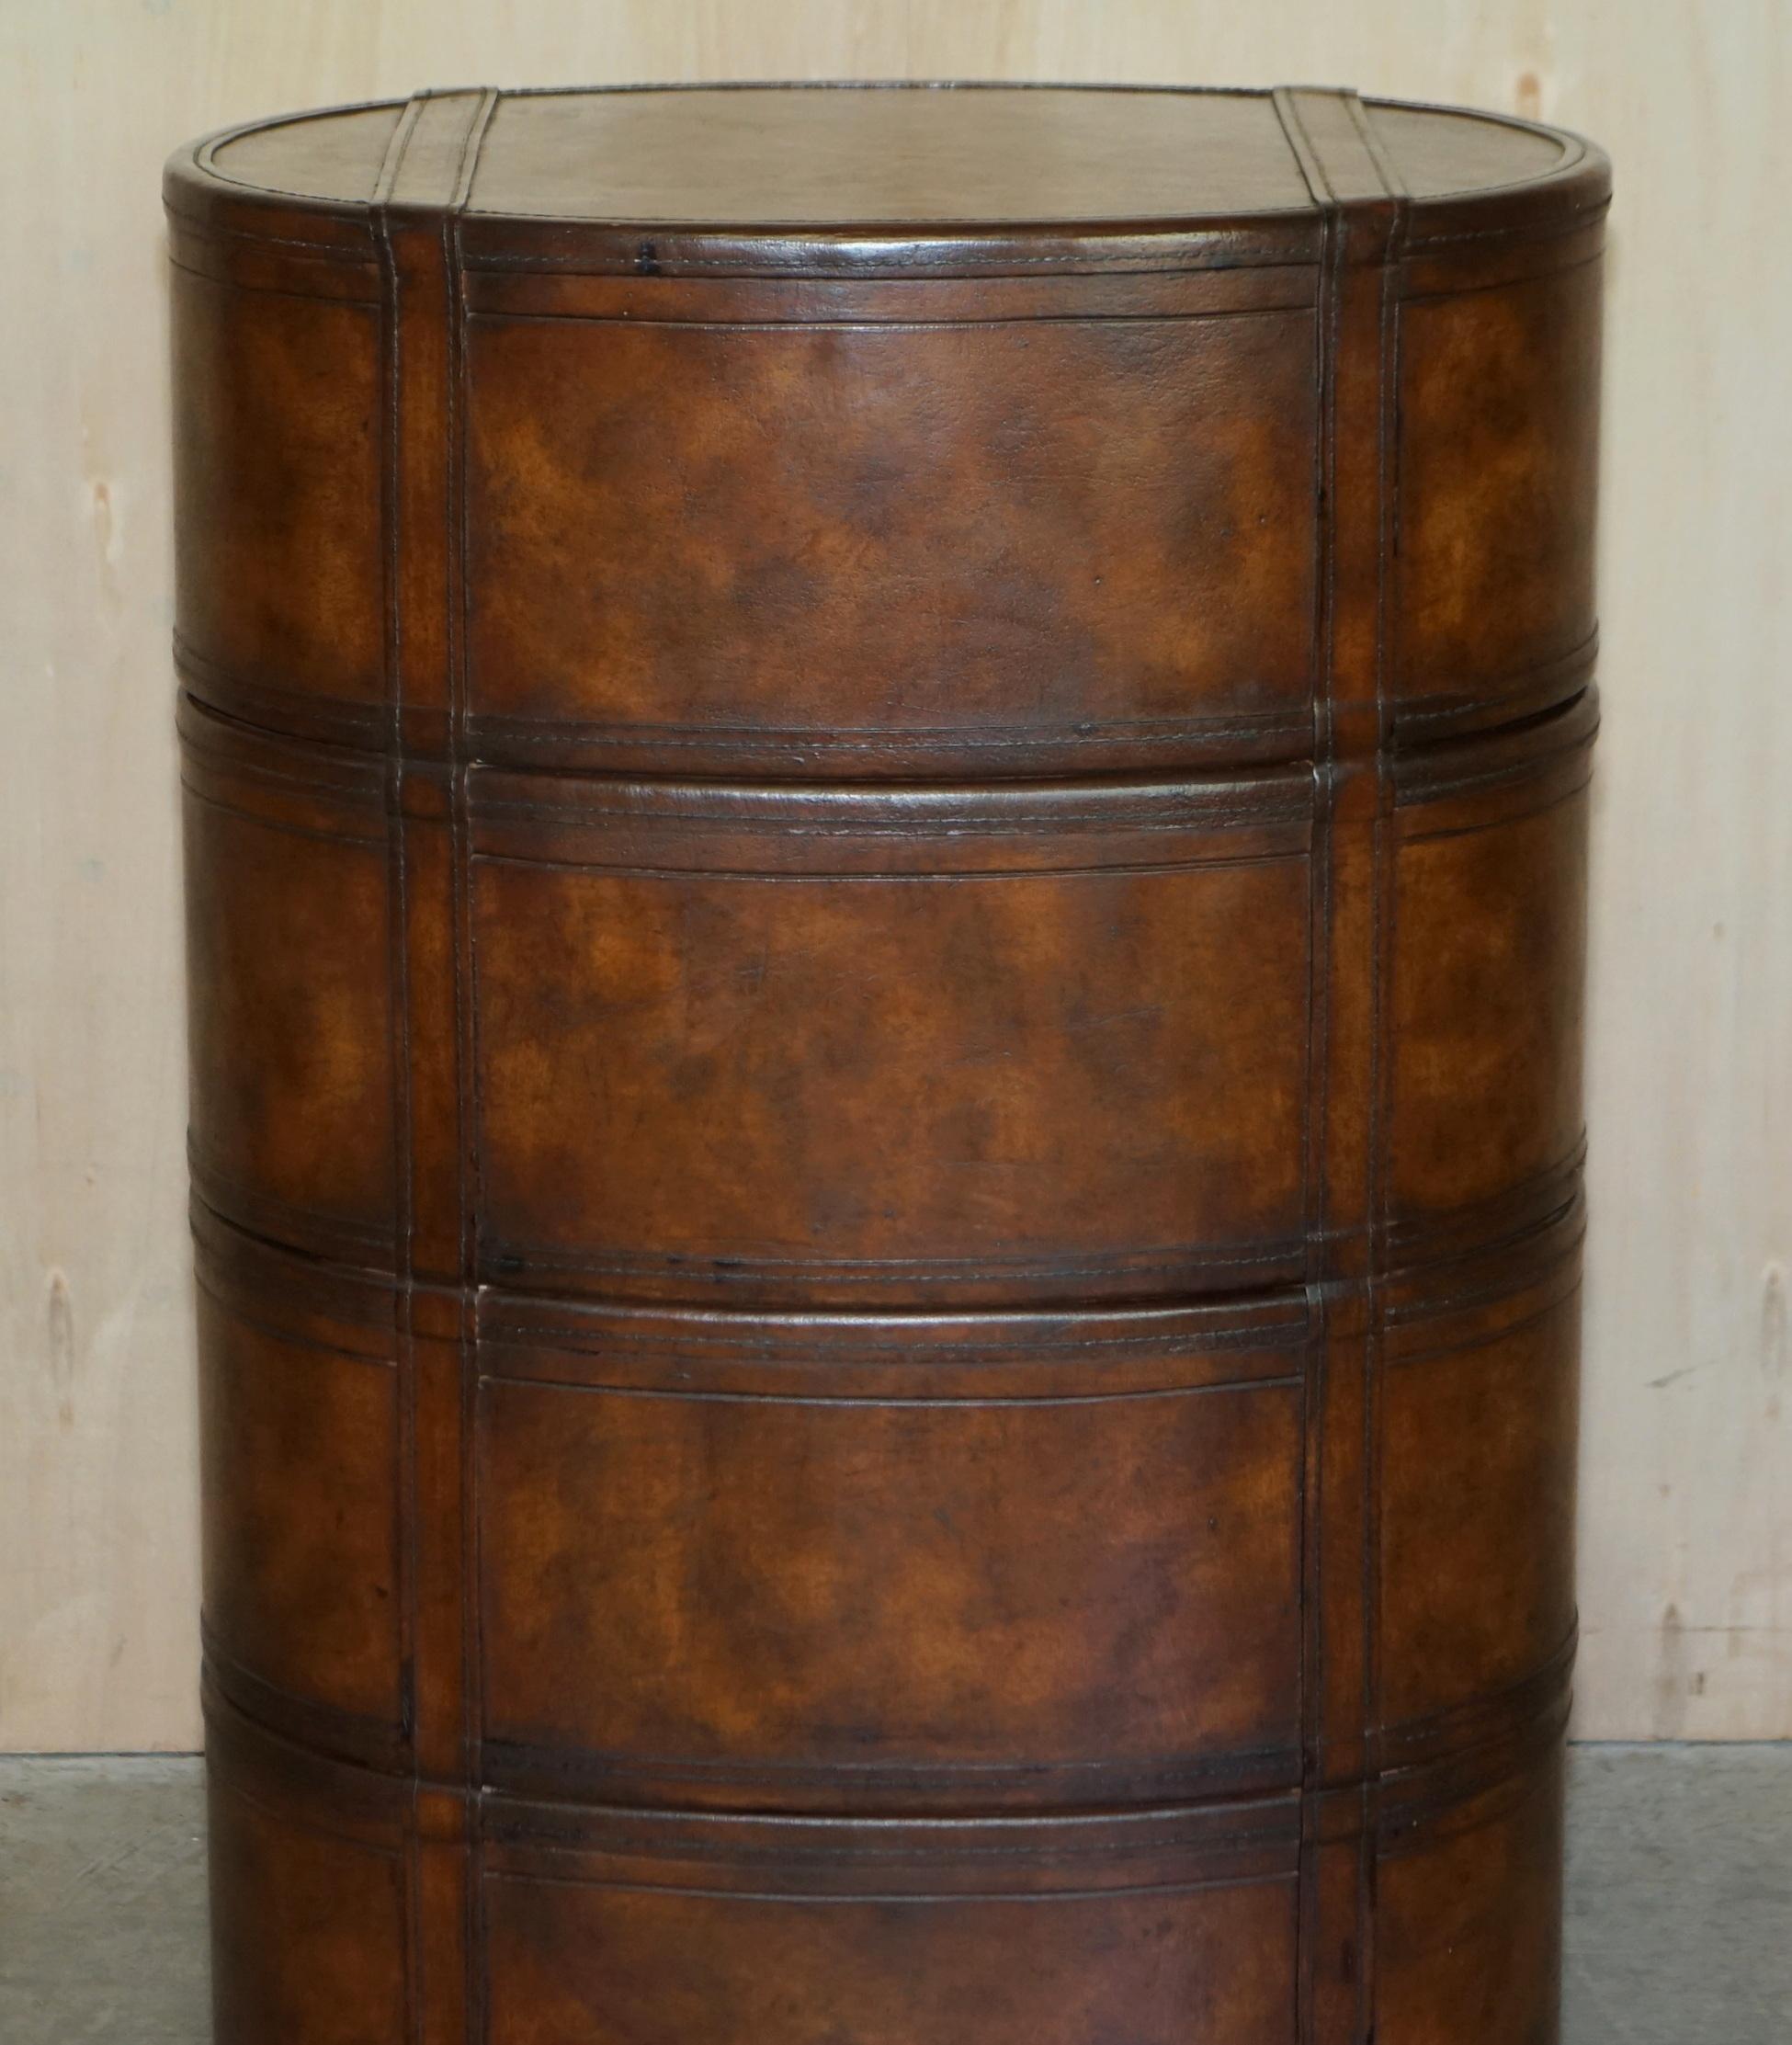 Brown Leather Oval Tallboy Chest of Drawers with Luggage Style Straps or Belts 5